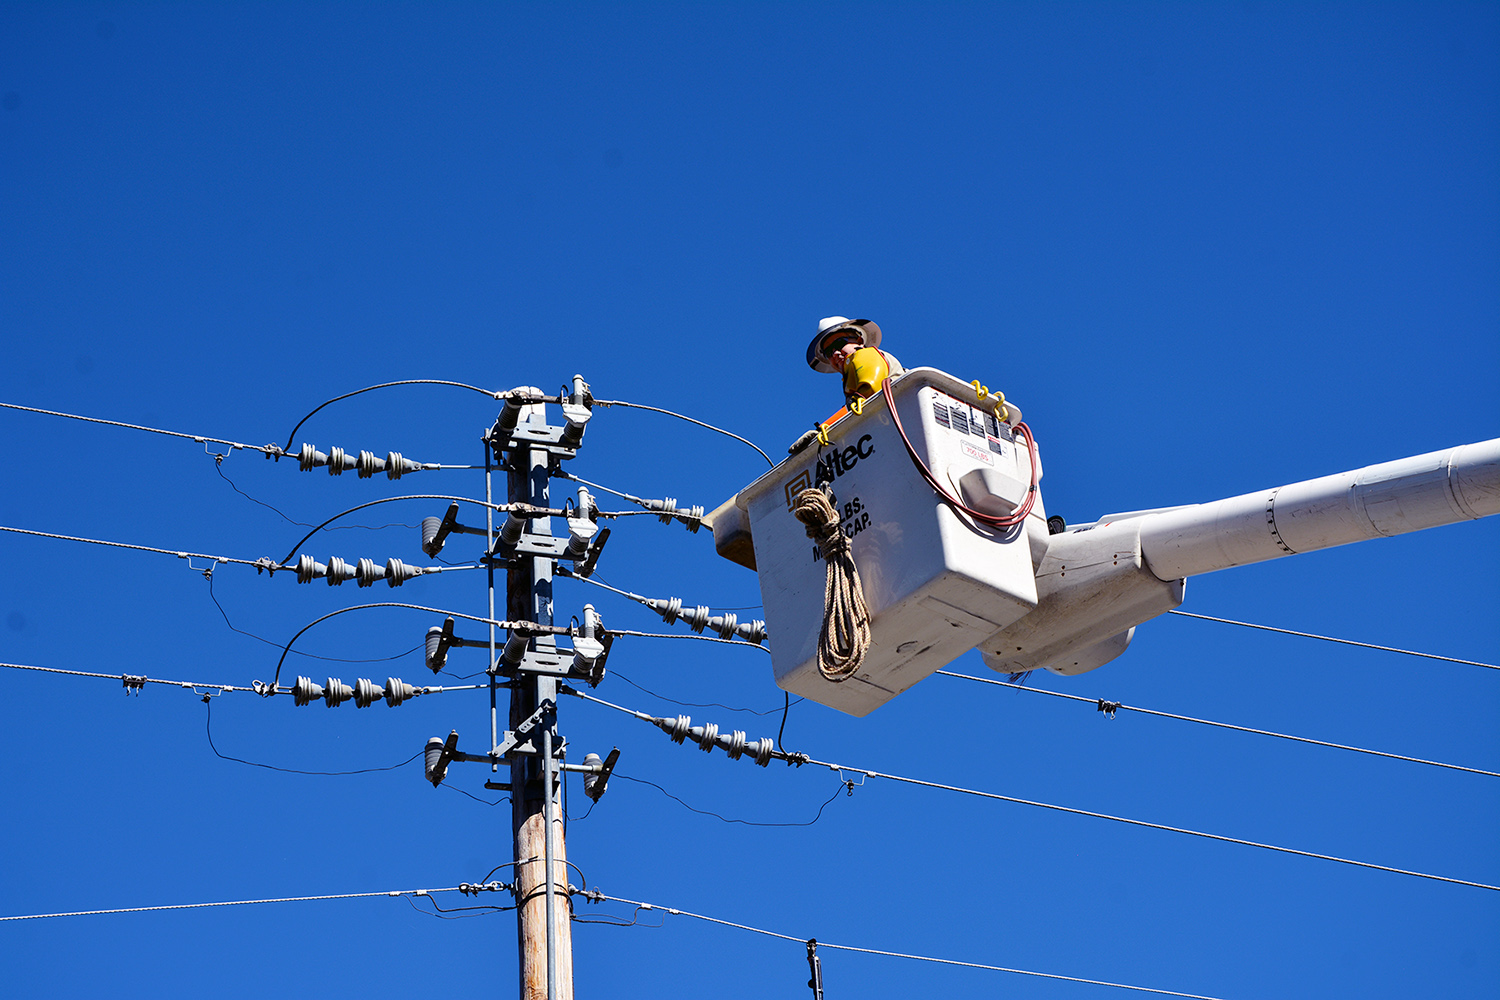 An electric lineman goes up in a bucket to work on power lines